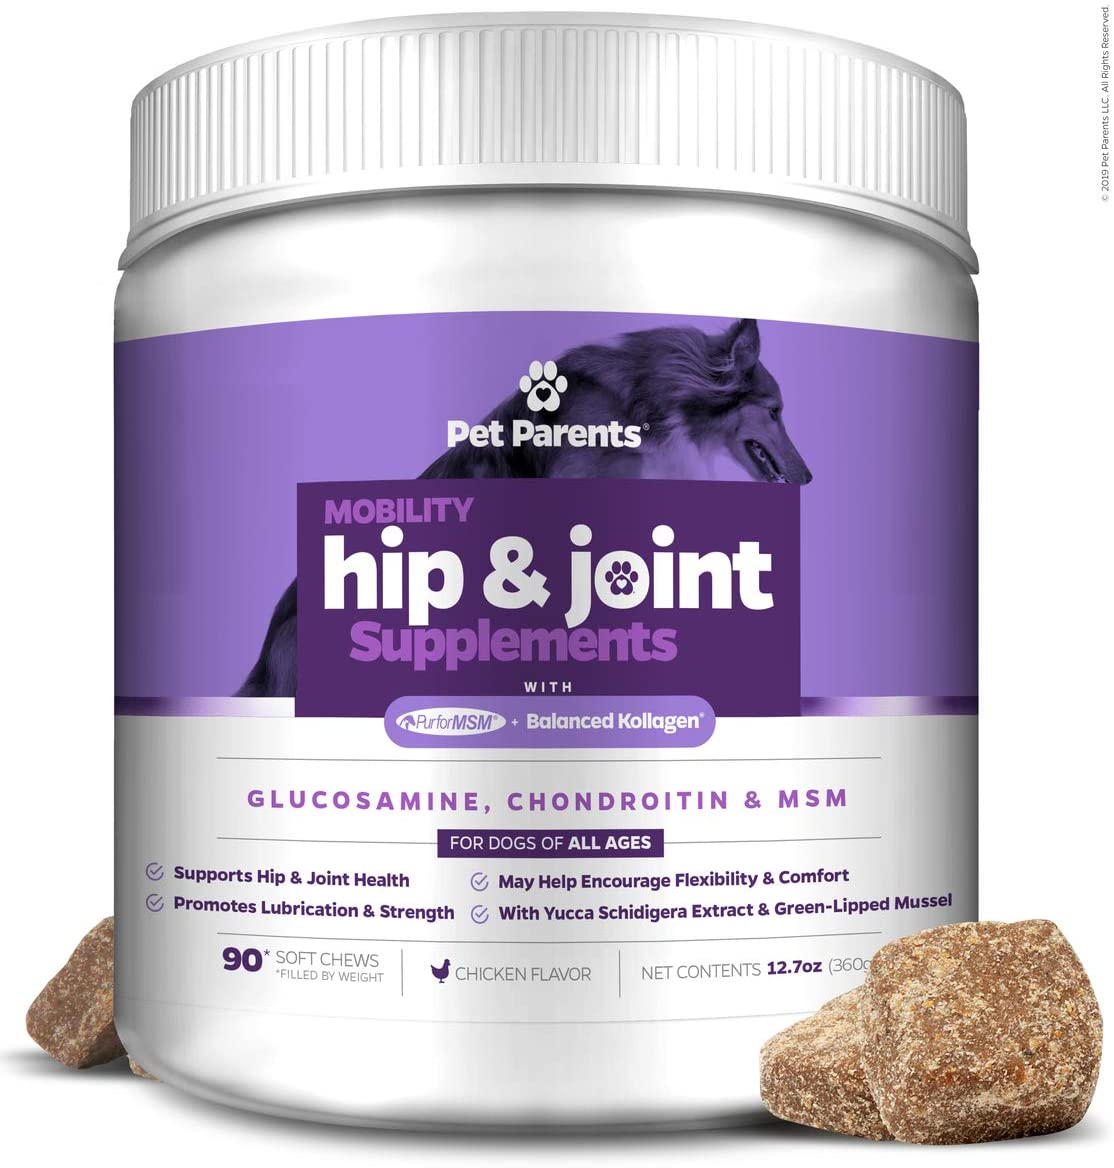 Best Dog Vitamin Supplements – Pet Parents Hip and Joint Support | Pros ...